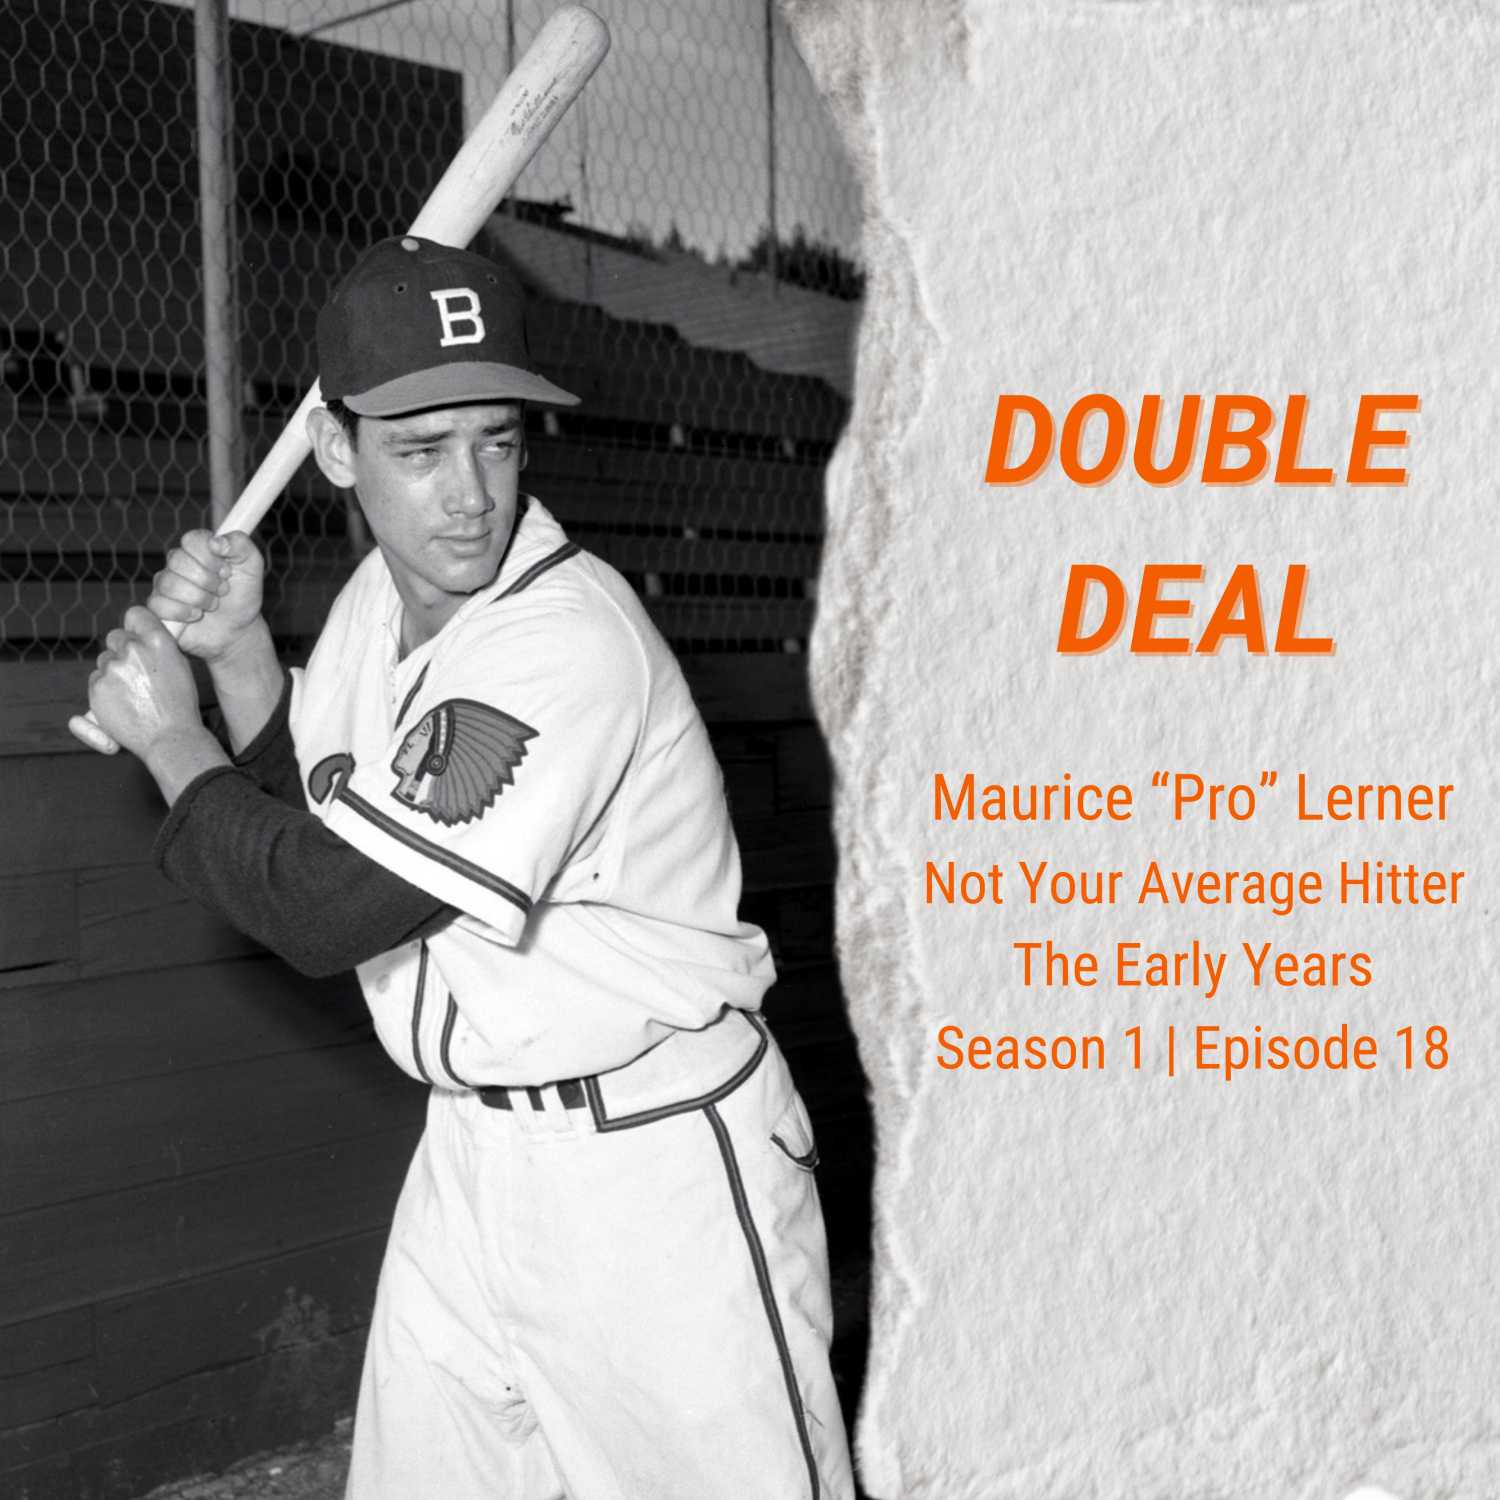 Maurice "Pro" Lerner - Not Your Average Hitter" - The Early Years